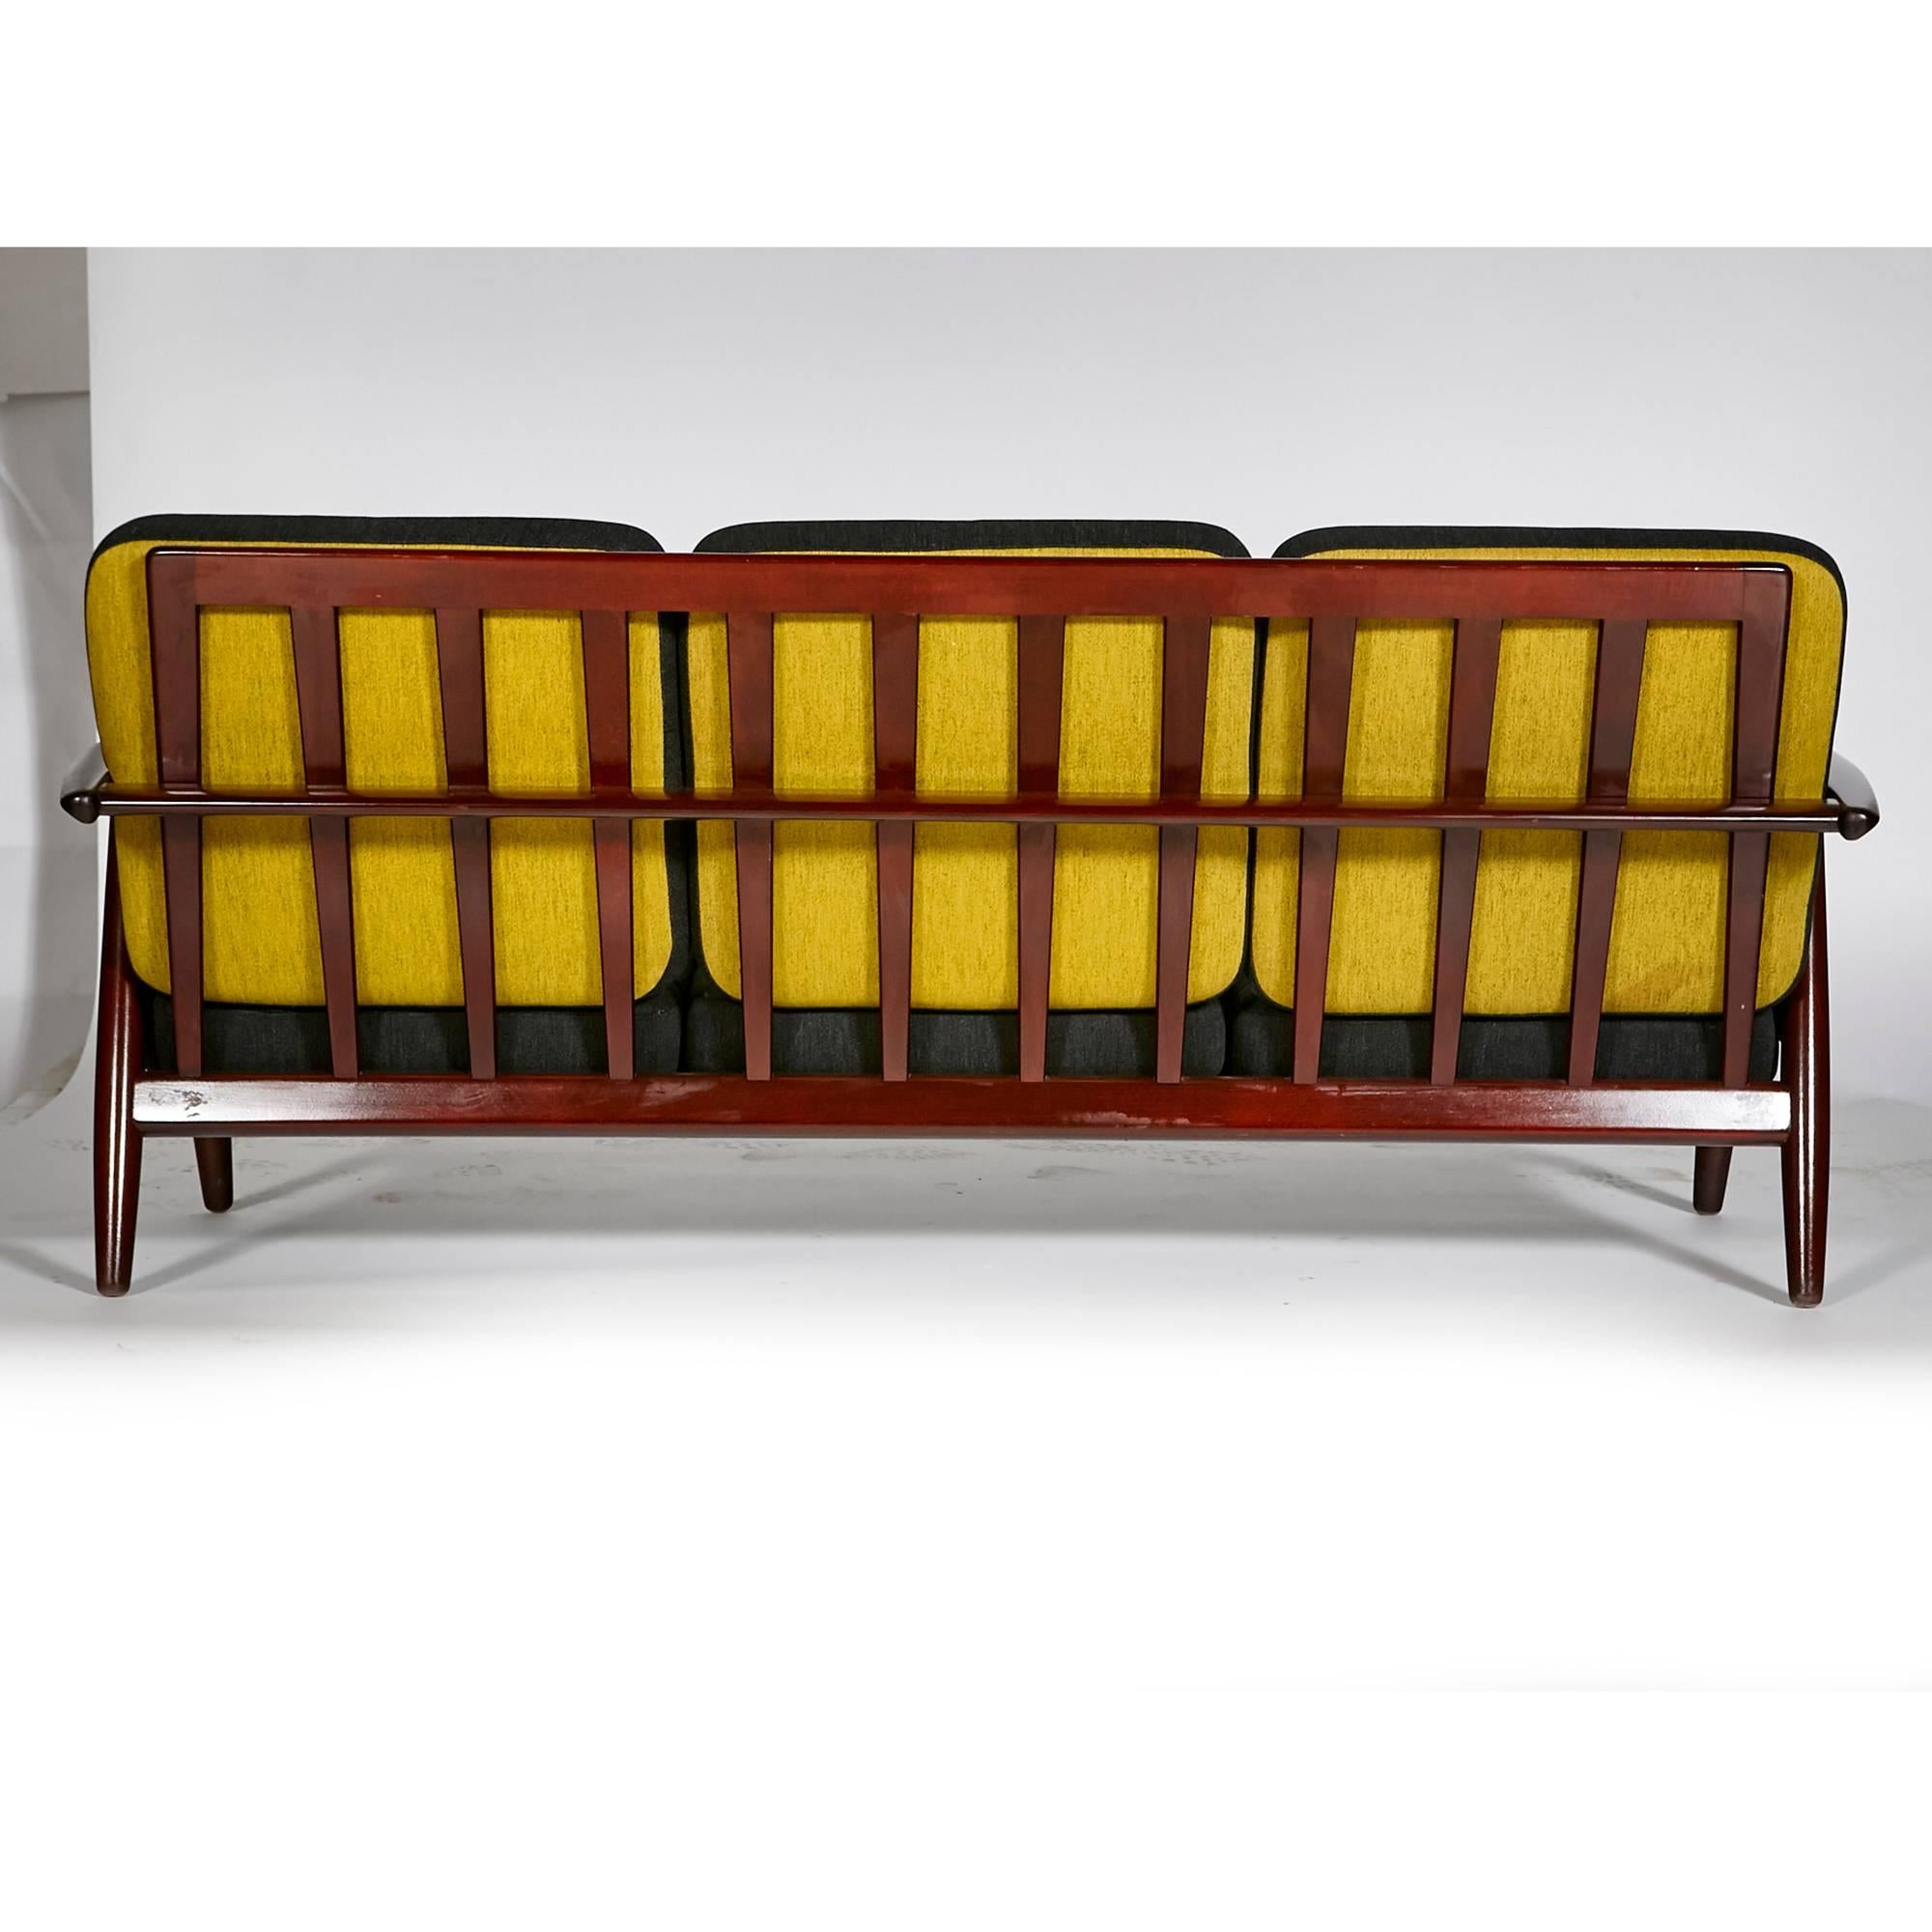 Hans J. Wegner for GETAMA Cigar Sofa with Reversible Cushions In Excellent Condition For Sale In Amherst, NH